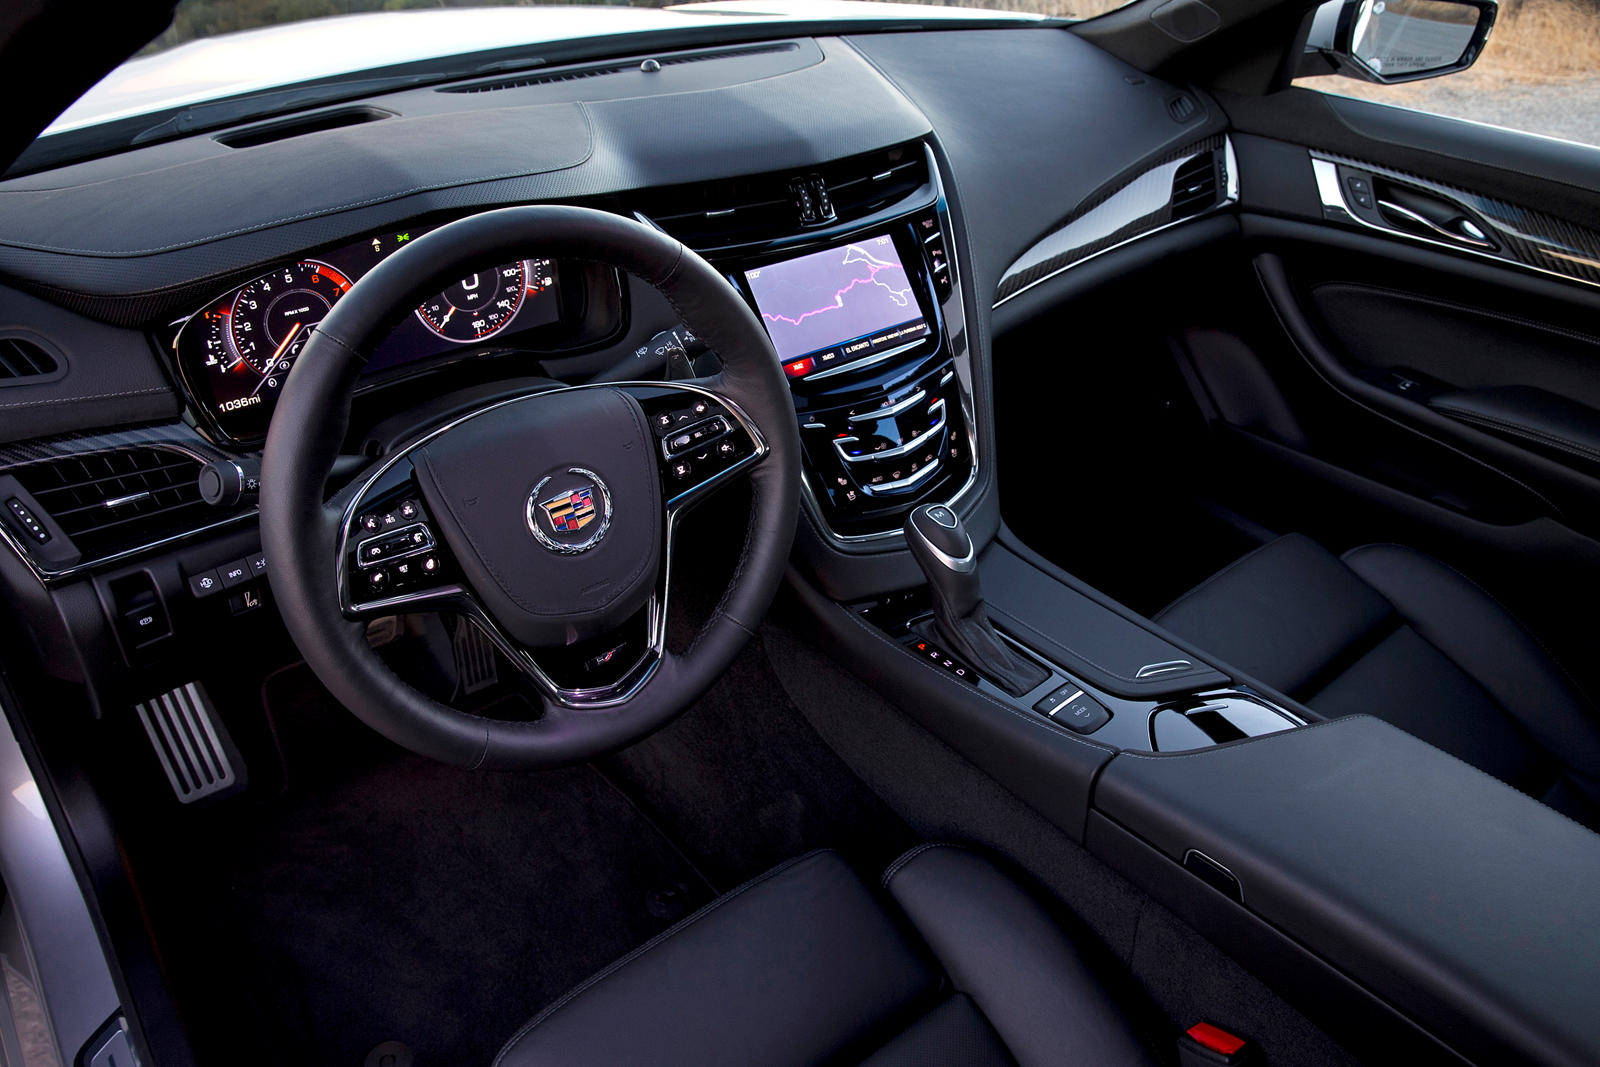 2016 Cadillac CTS interior review  YouTube